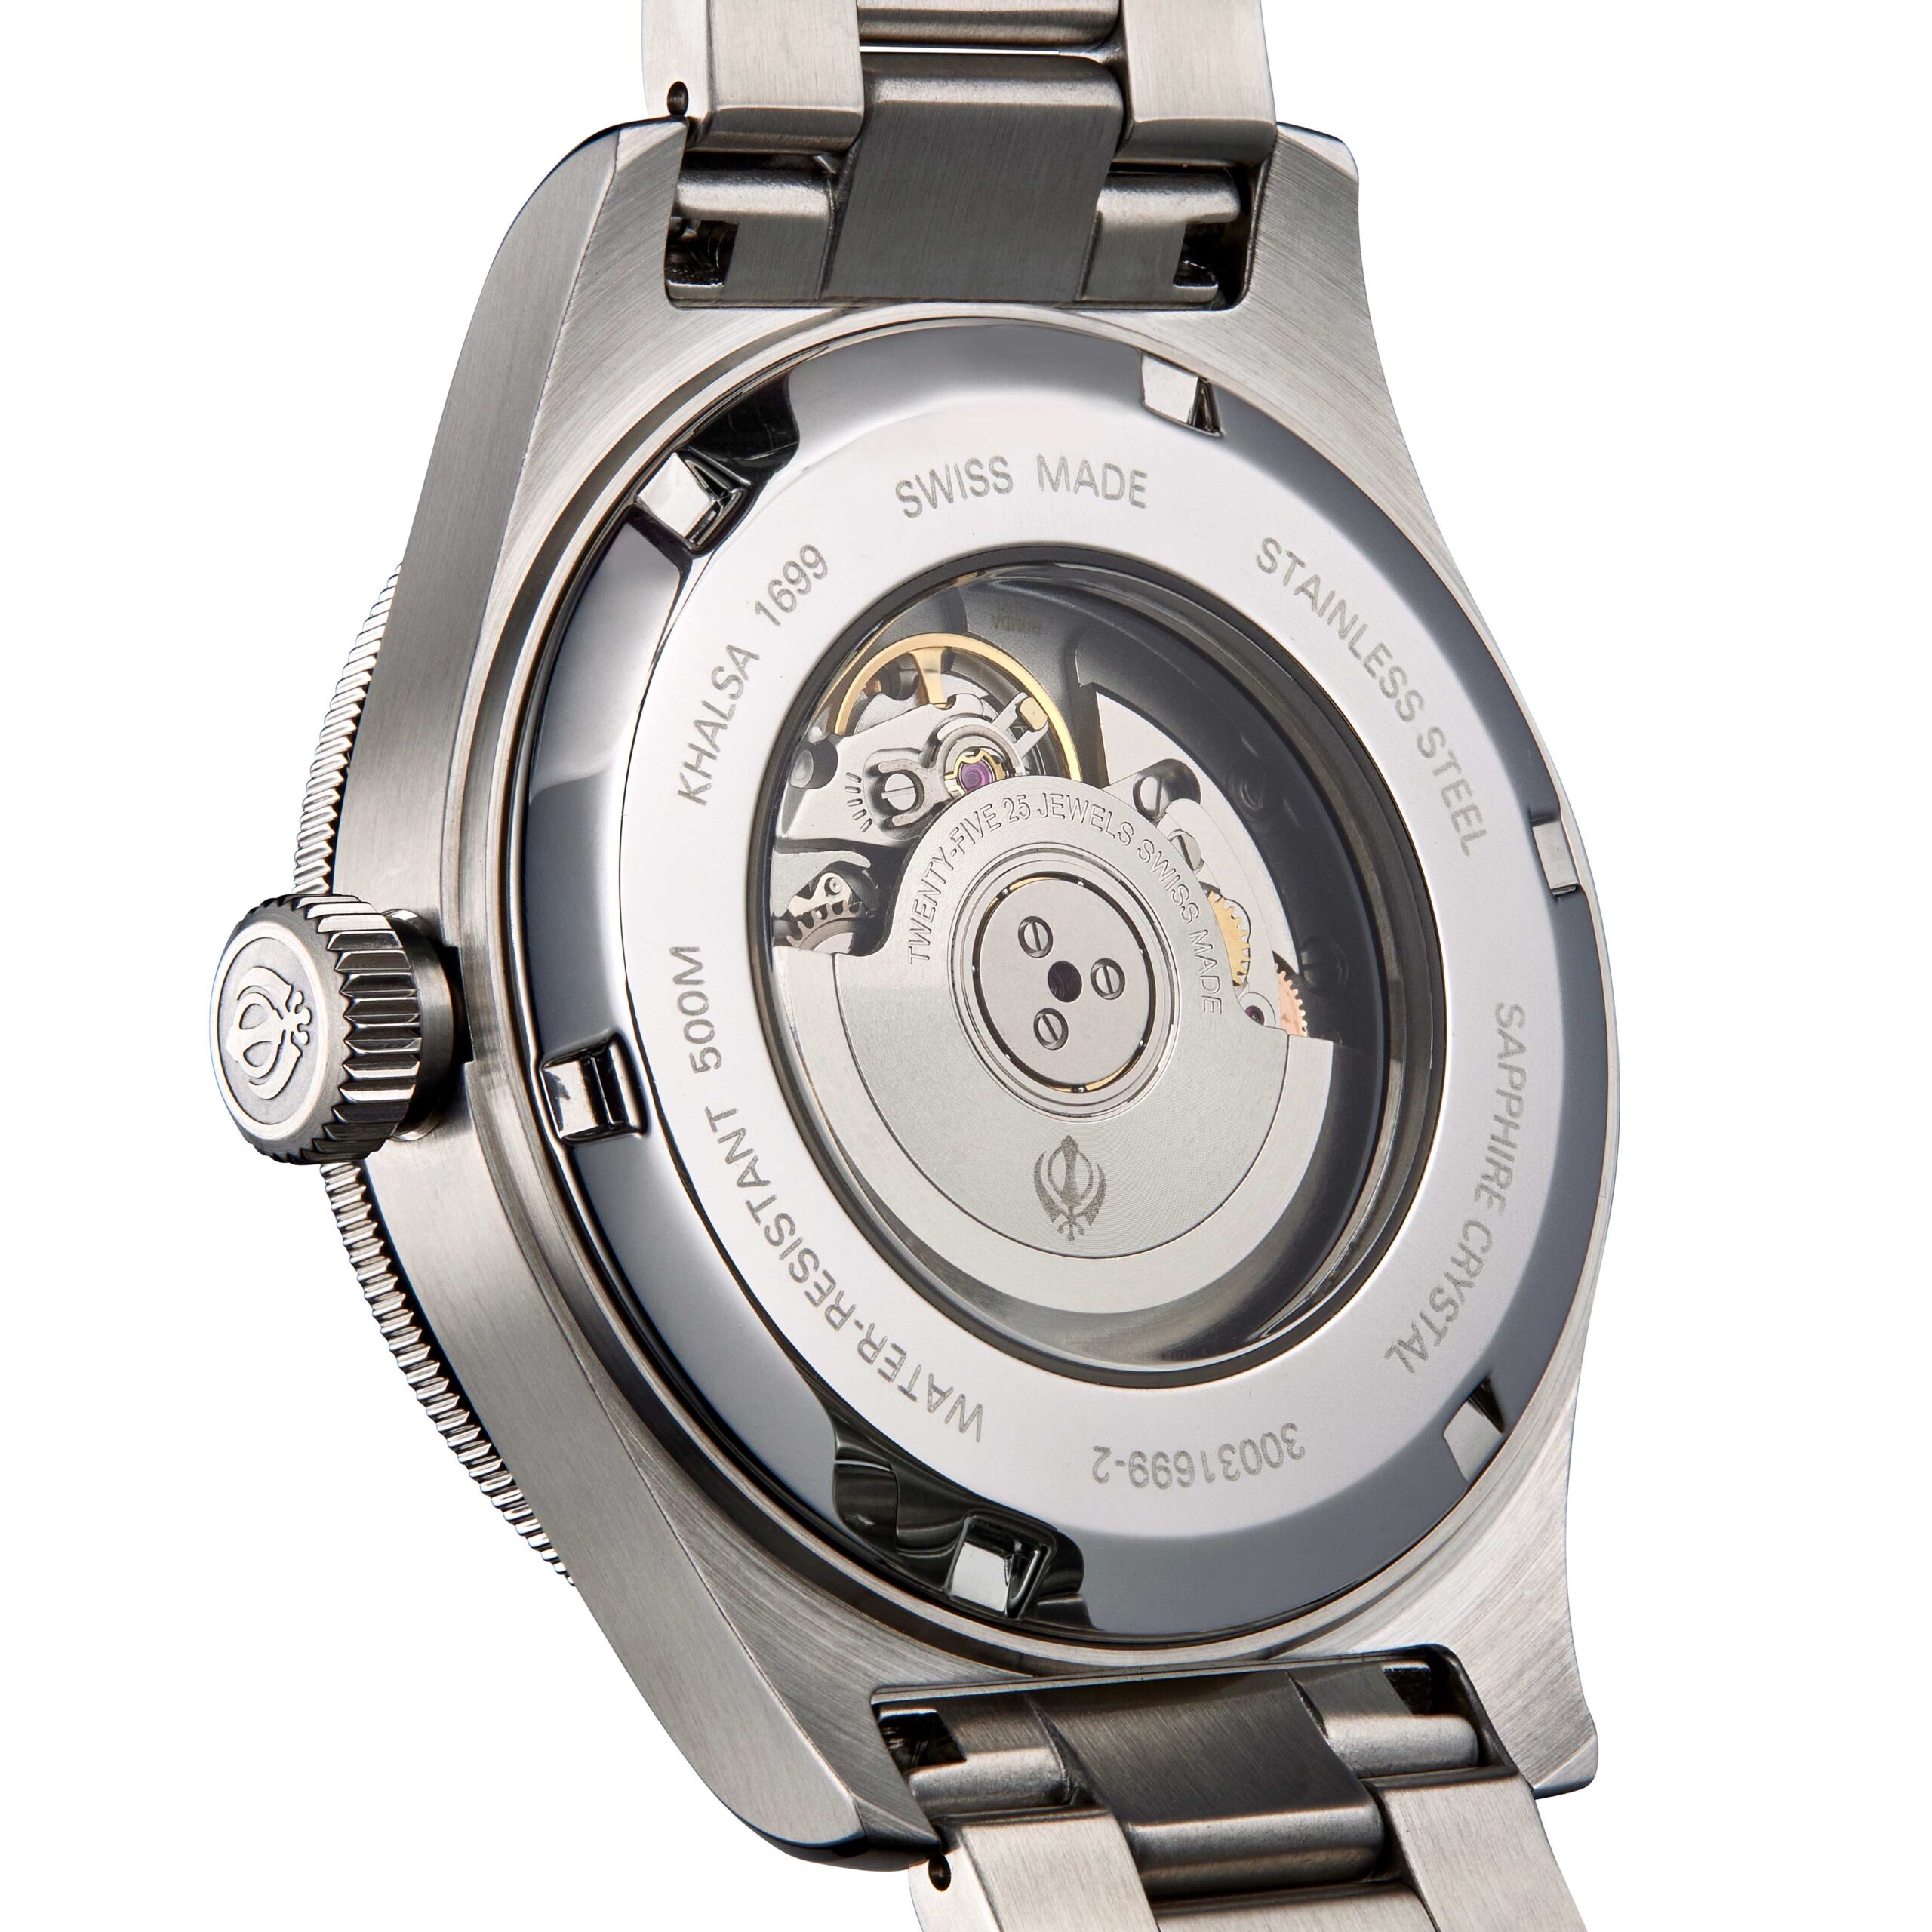 Swiss made watch product Photography displaying the back case, showing off the inside components that make the watch work, photographed and Studio